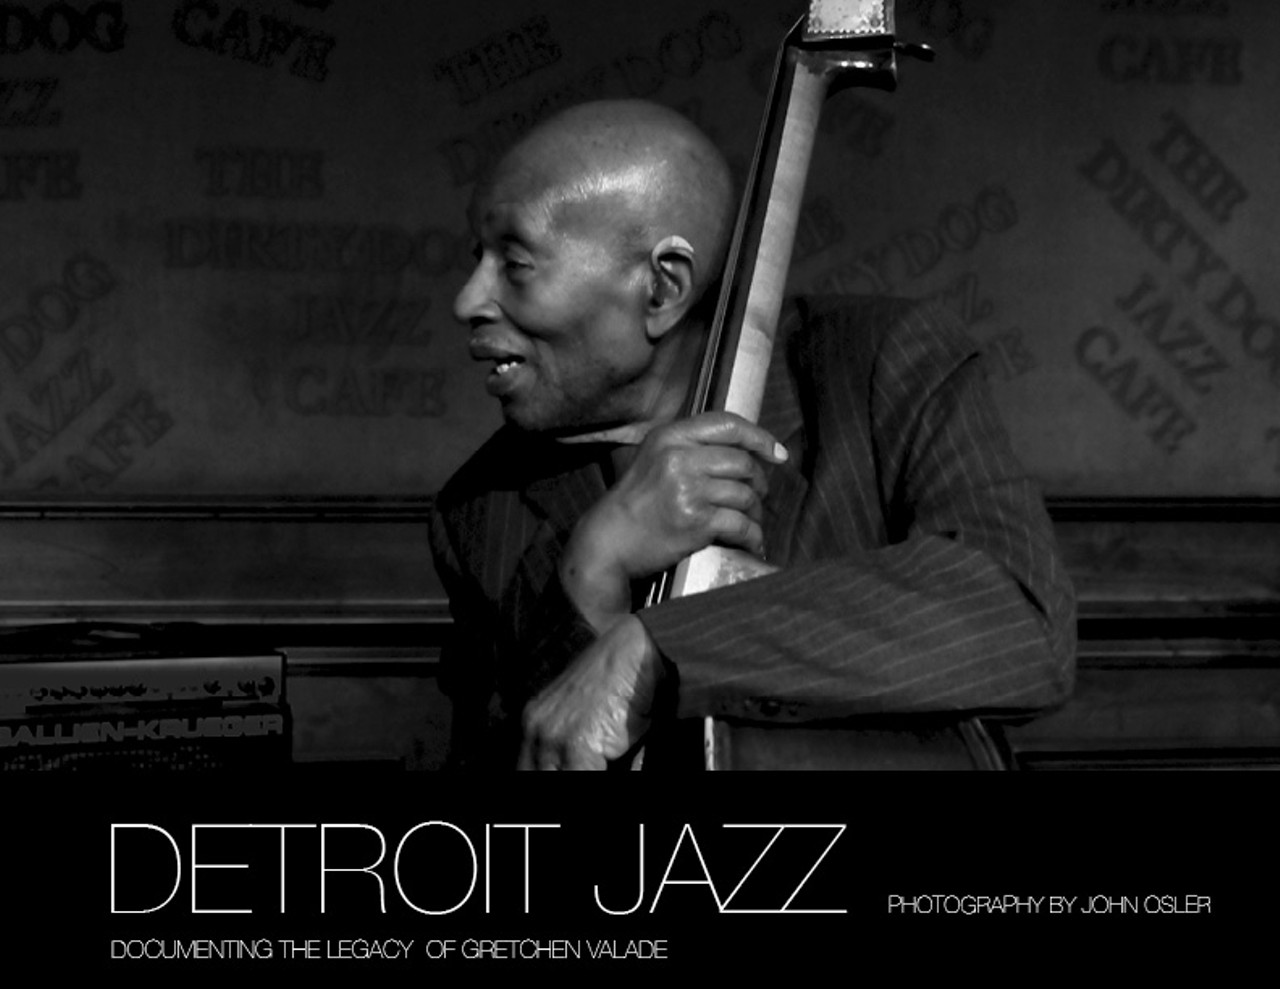 Detroit Jazz: Documenting the Legacy of Gretchen Valade by John Osler